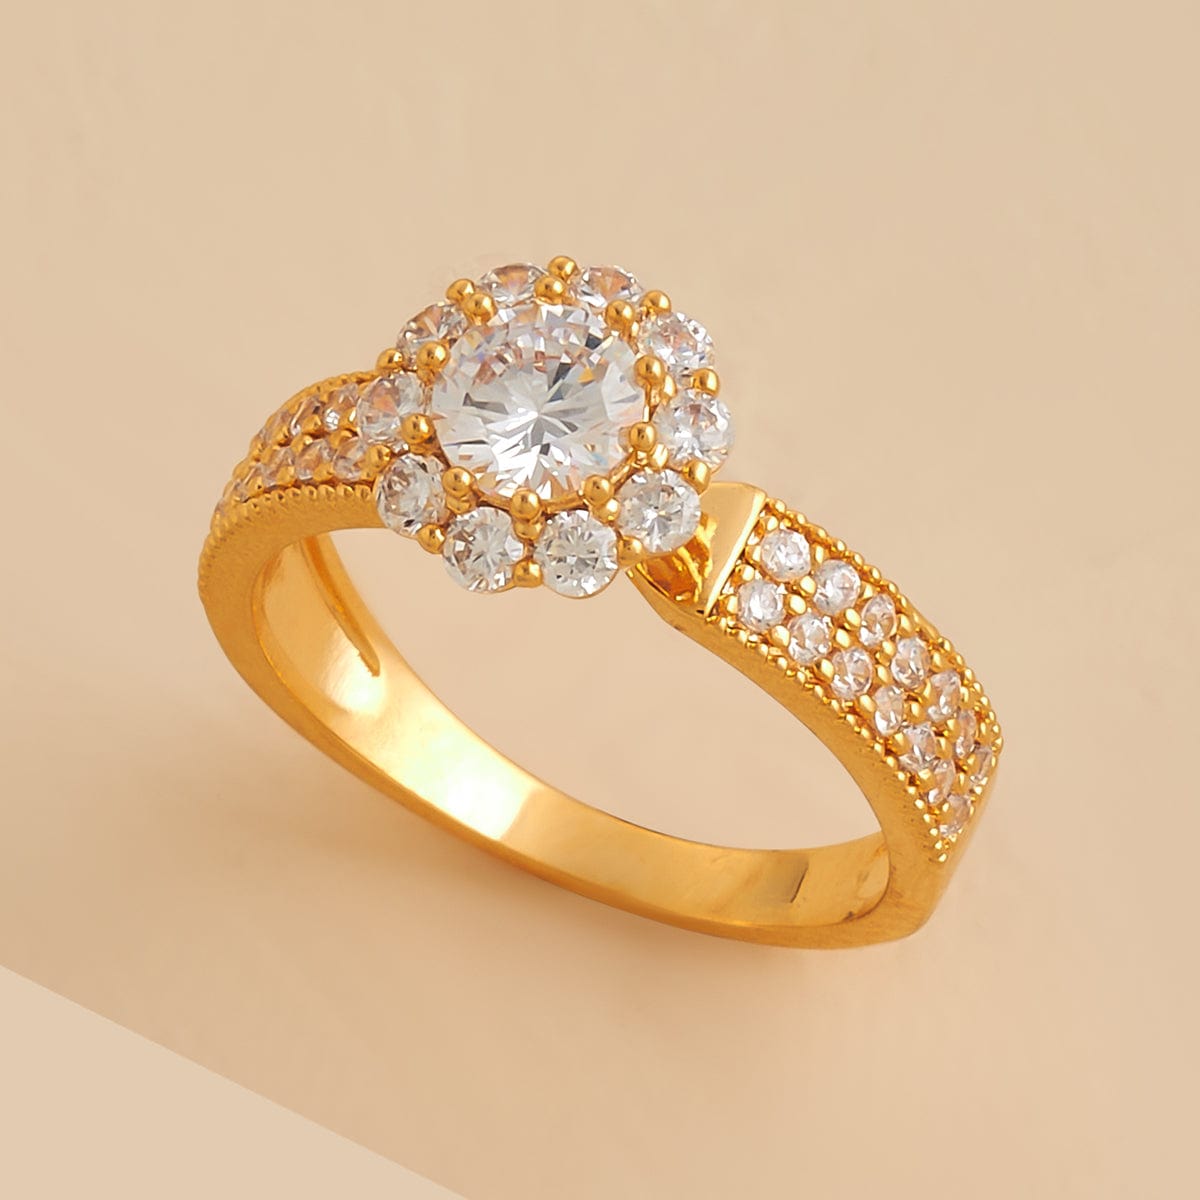 Women's Gold Rings Price Starting From Rs 10,000/Pc. Find Verified Sellers  in Mangalore - JdMart